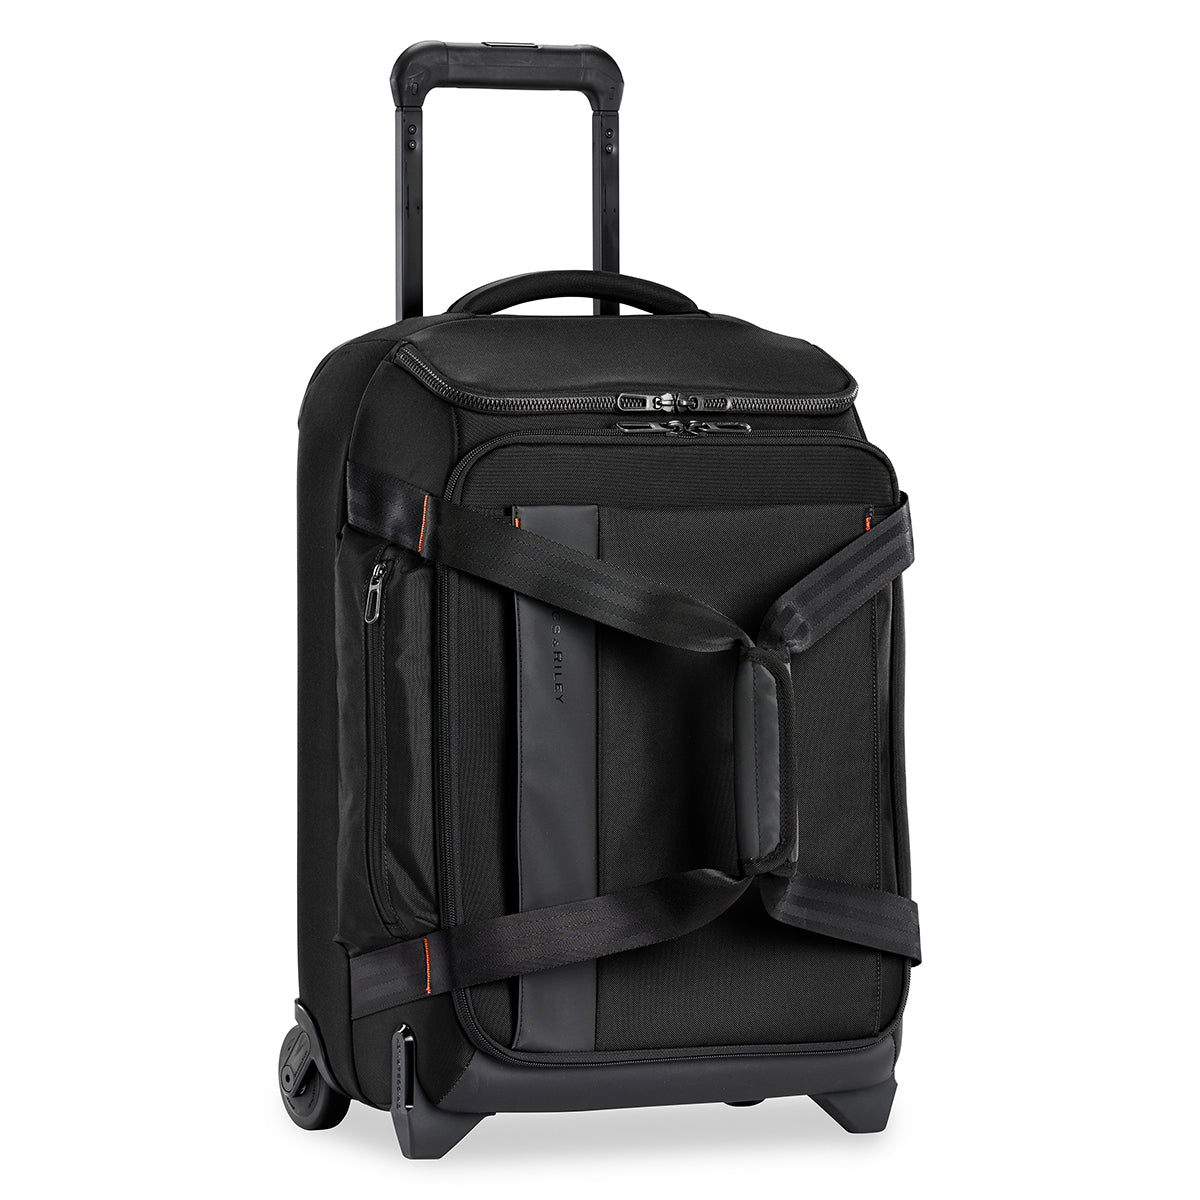 Briggs & Riley ZDX Rolling Carry-On Upright Duffle Bag